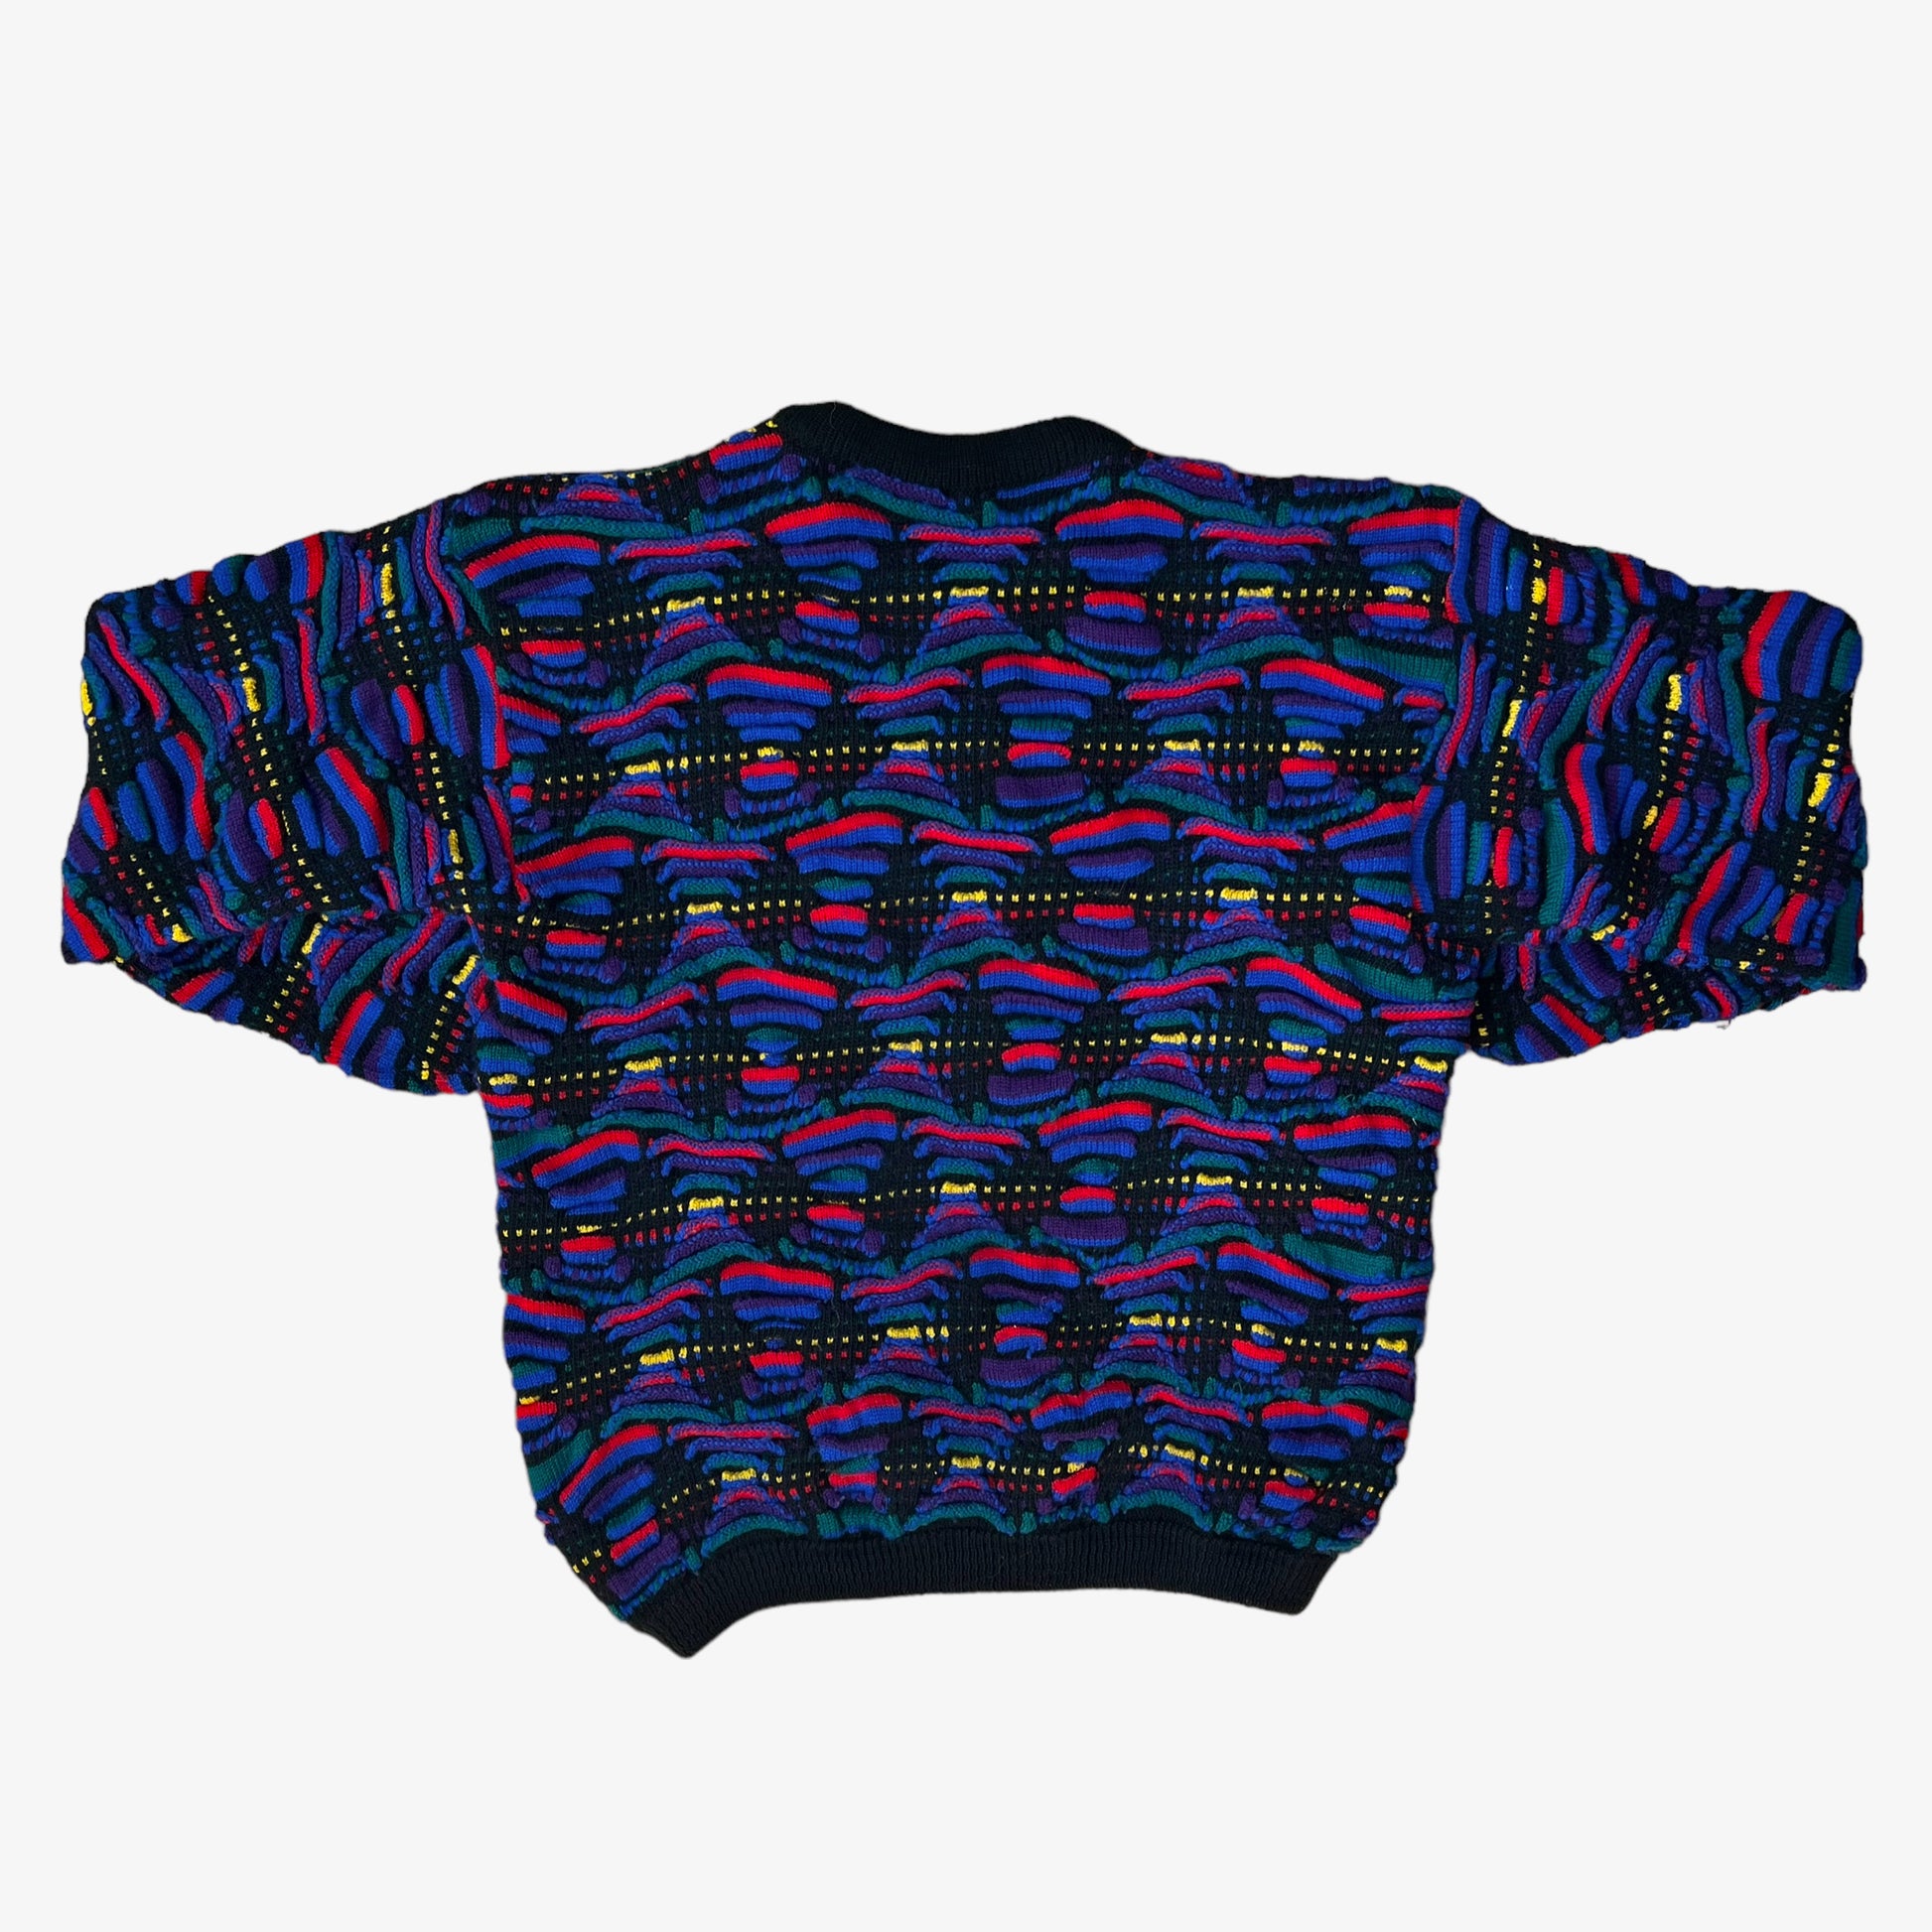 Vintage 90s Coogi 3D Textured Pure Wool Colourful Jumper Back - Casspios Dream